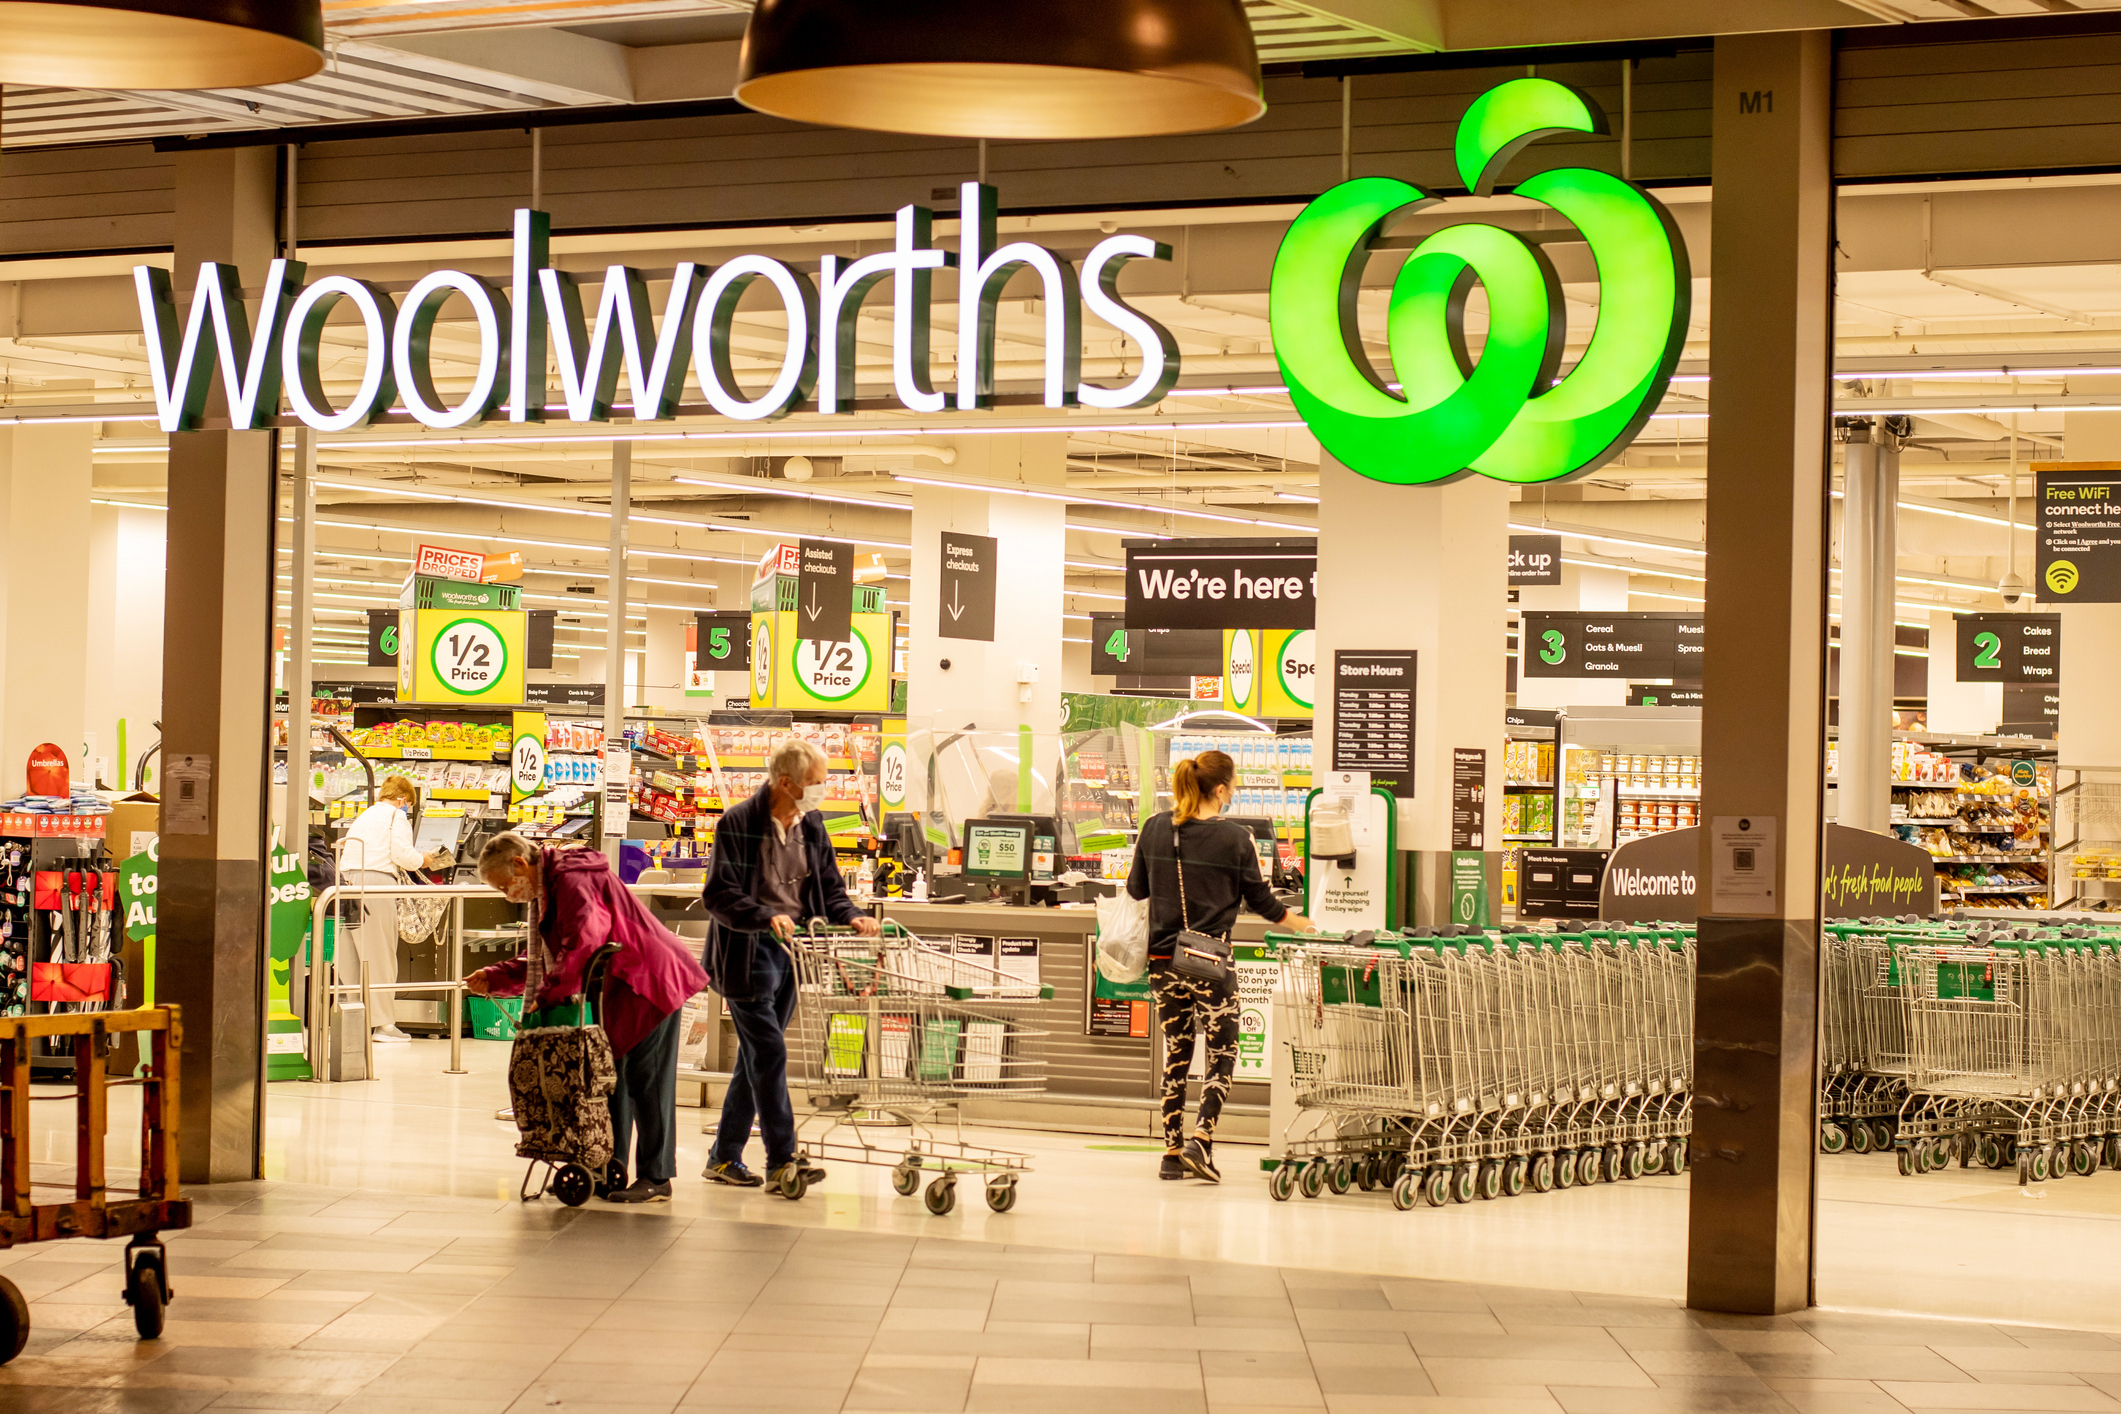 aussies' trust in coles and woolworths has plummeted, survey finds